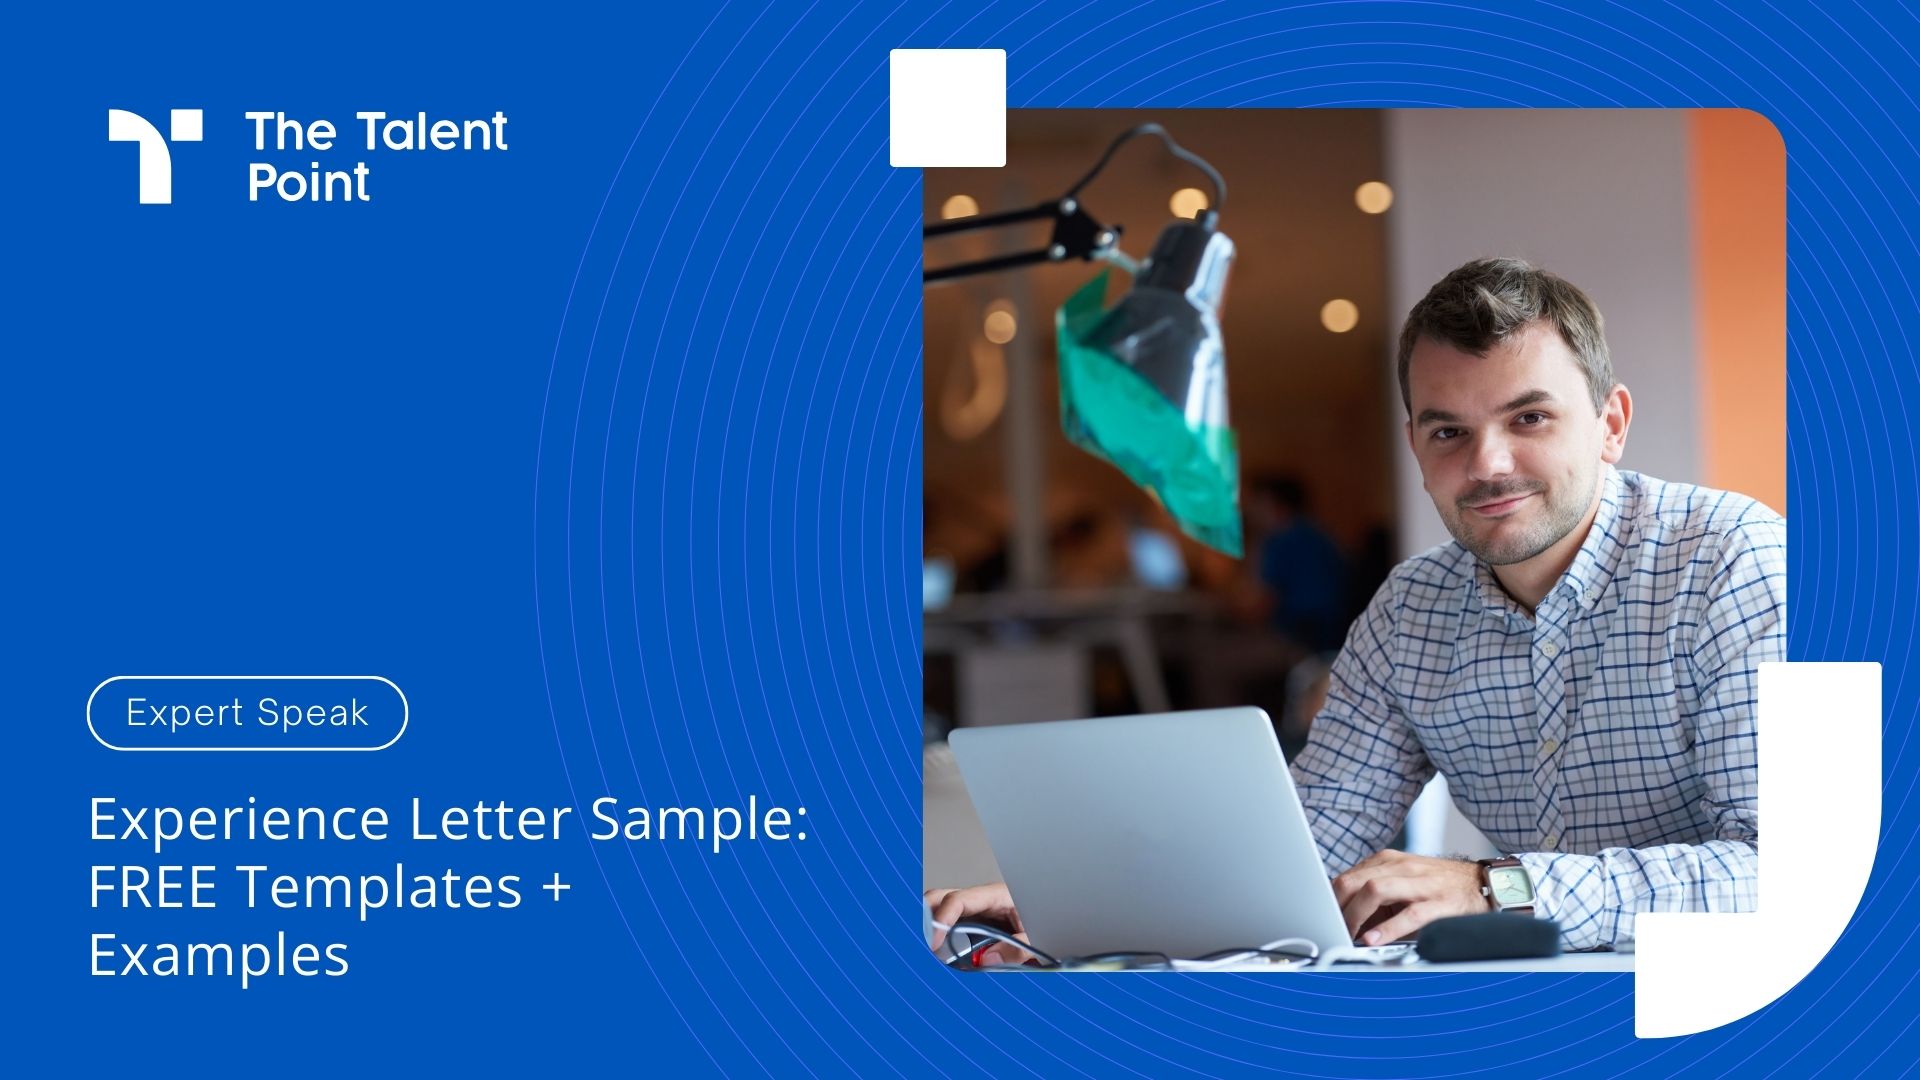 Work Experience Letter Samples  by Employer  - Free Templates to Use - TalentPoint